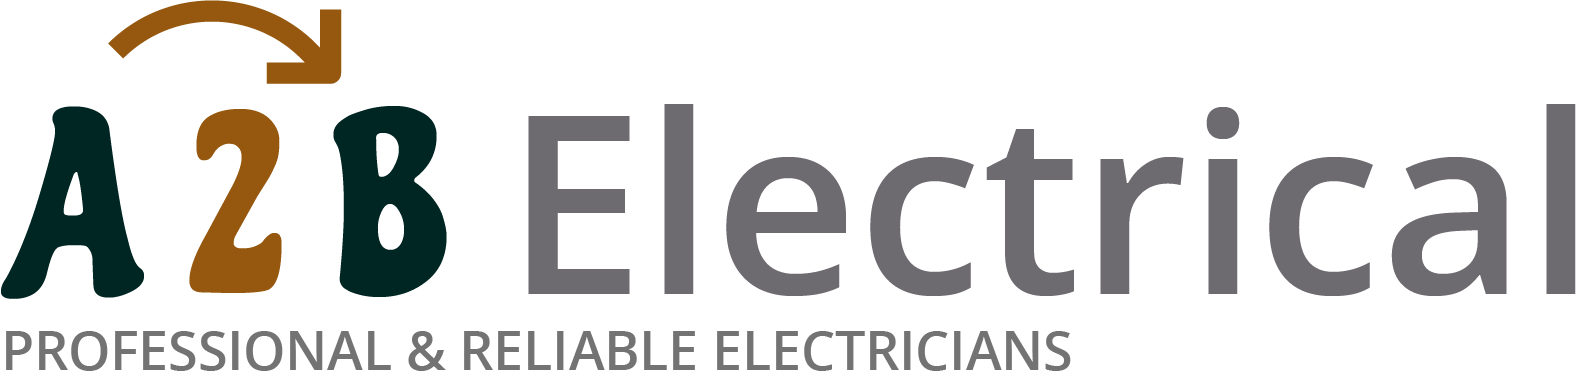 If you have electrical wiring problems in Sevenoaks, we can provide an electrician to have a look for you. 